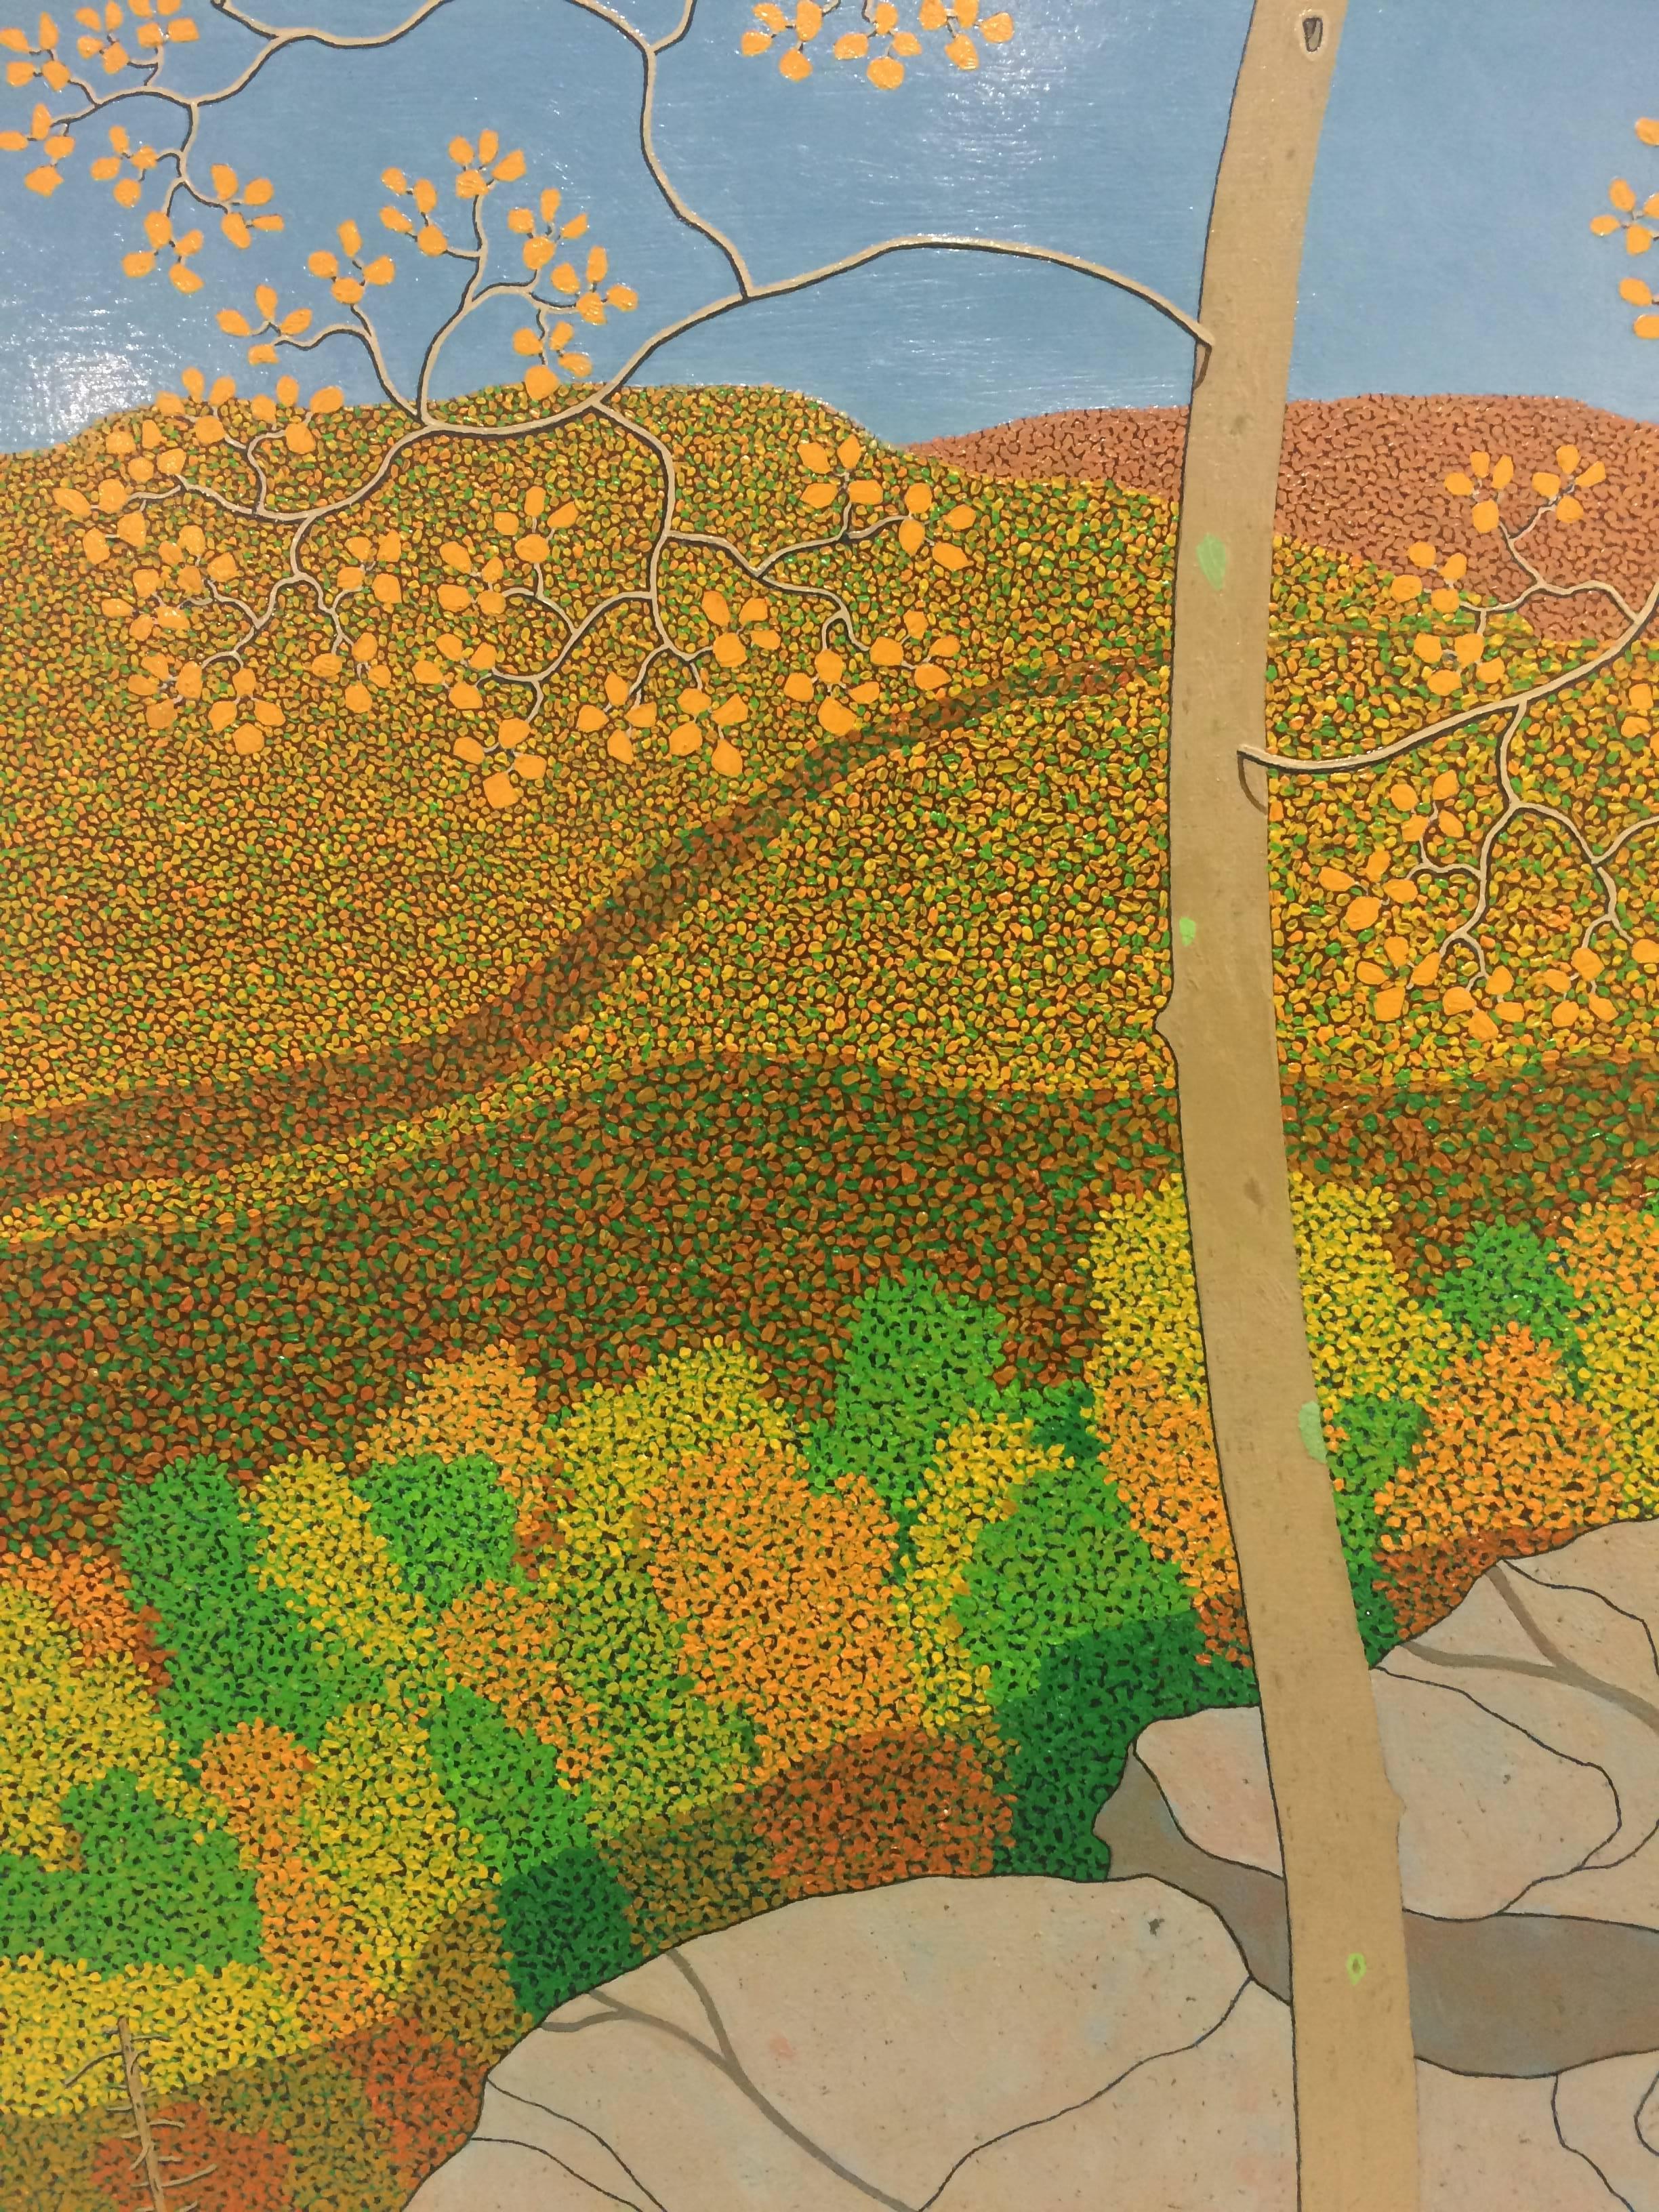 Overlook Oct. Wyatt Mt., Virginia Autumn Landscape, Blue Sky, Colorful Leaves - Gray Landscape Painting by Gregory Hennen